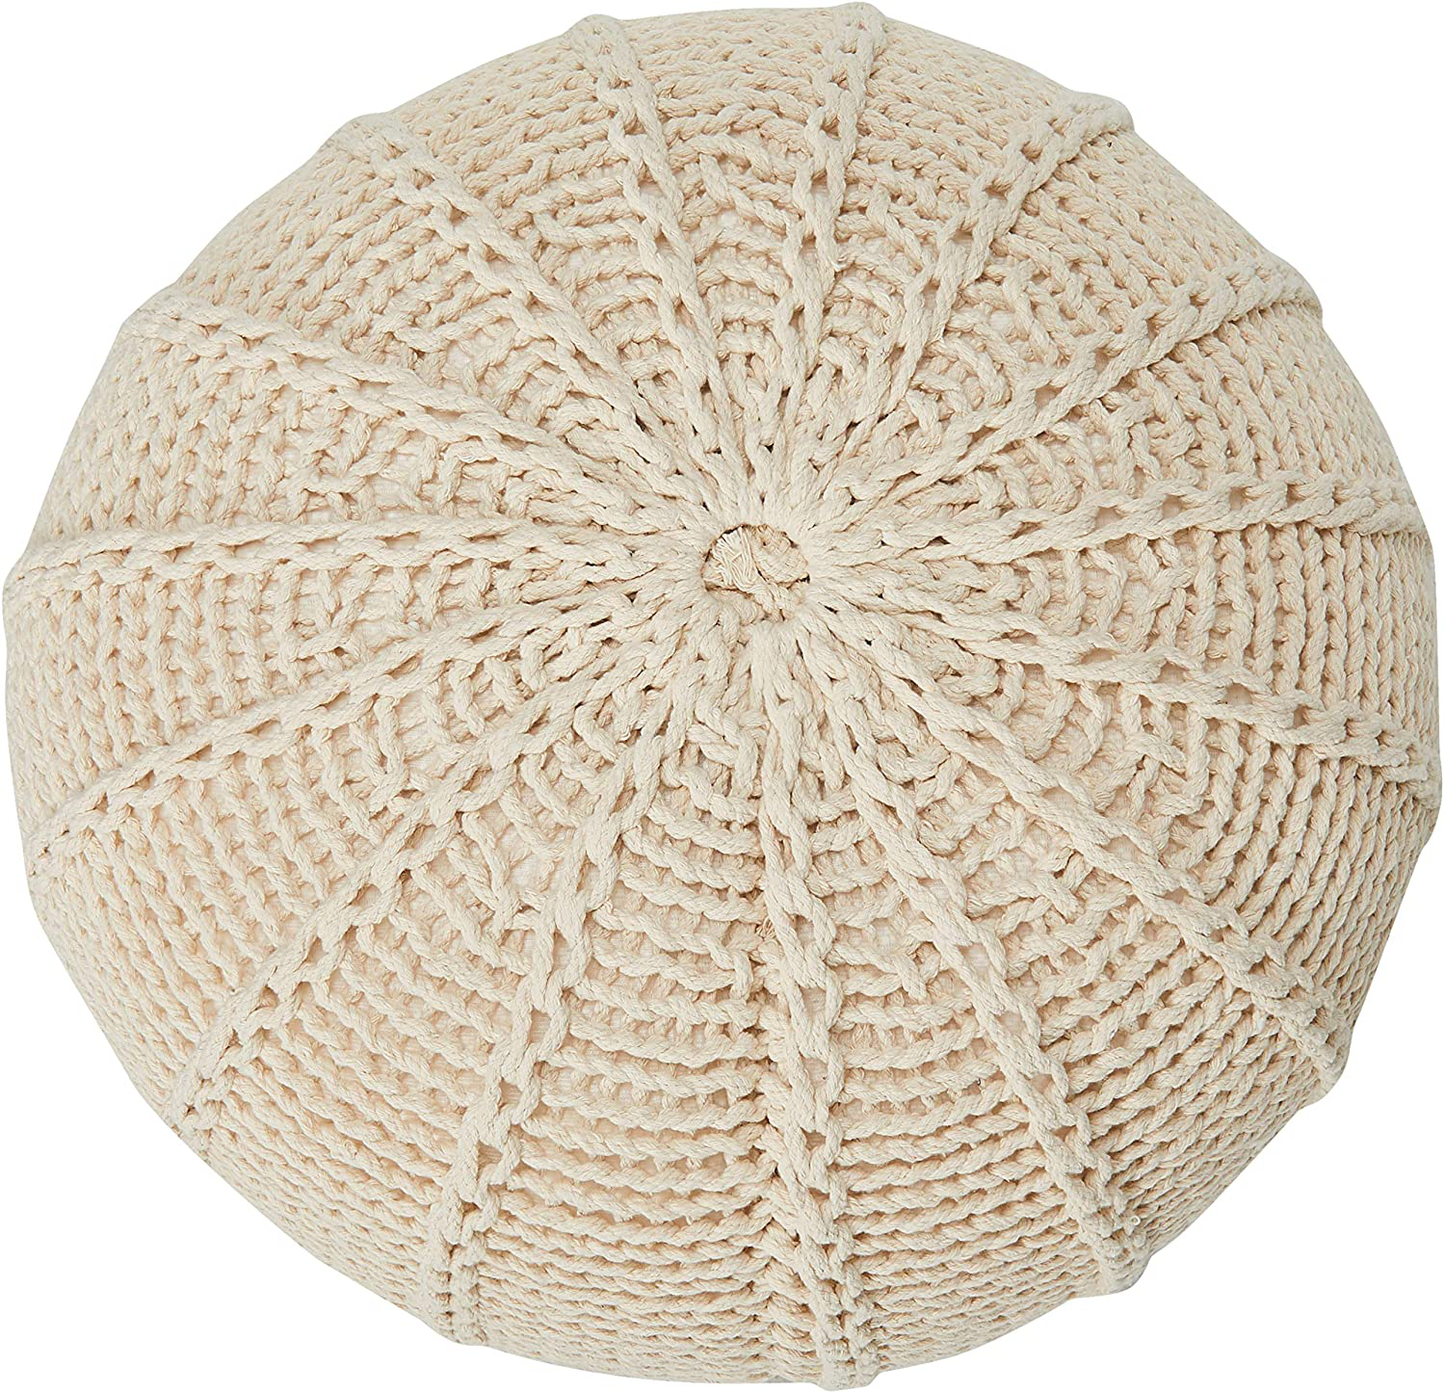 Christopher Knight Home Agatha Knitted Cotton Pouf, Beige